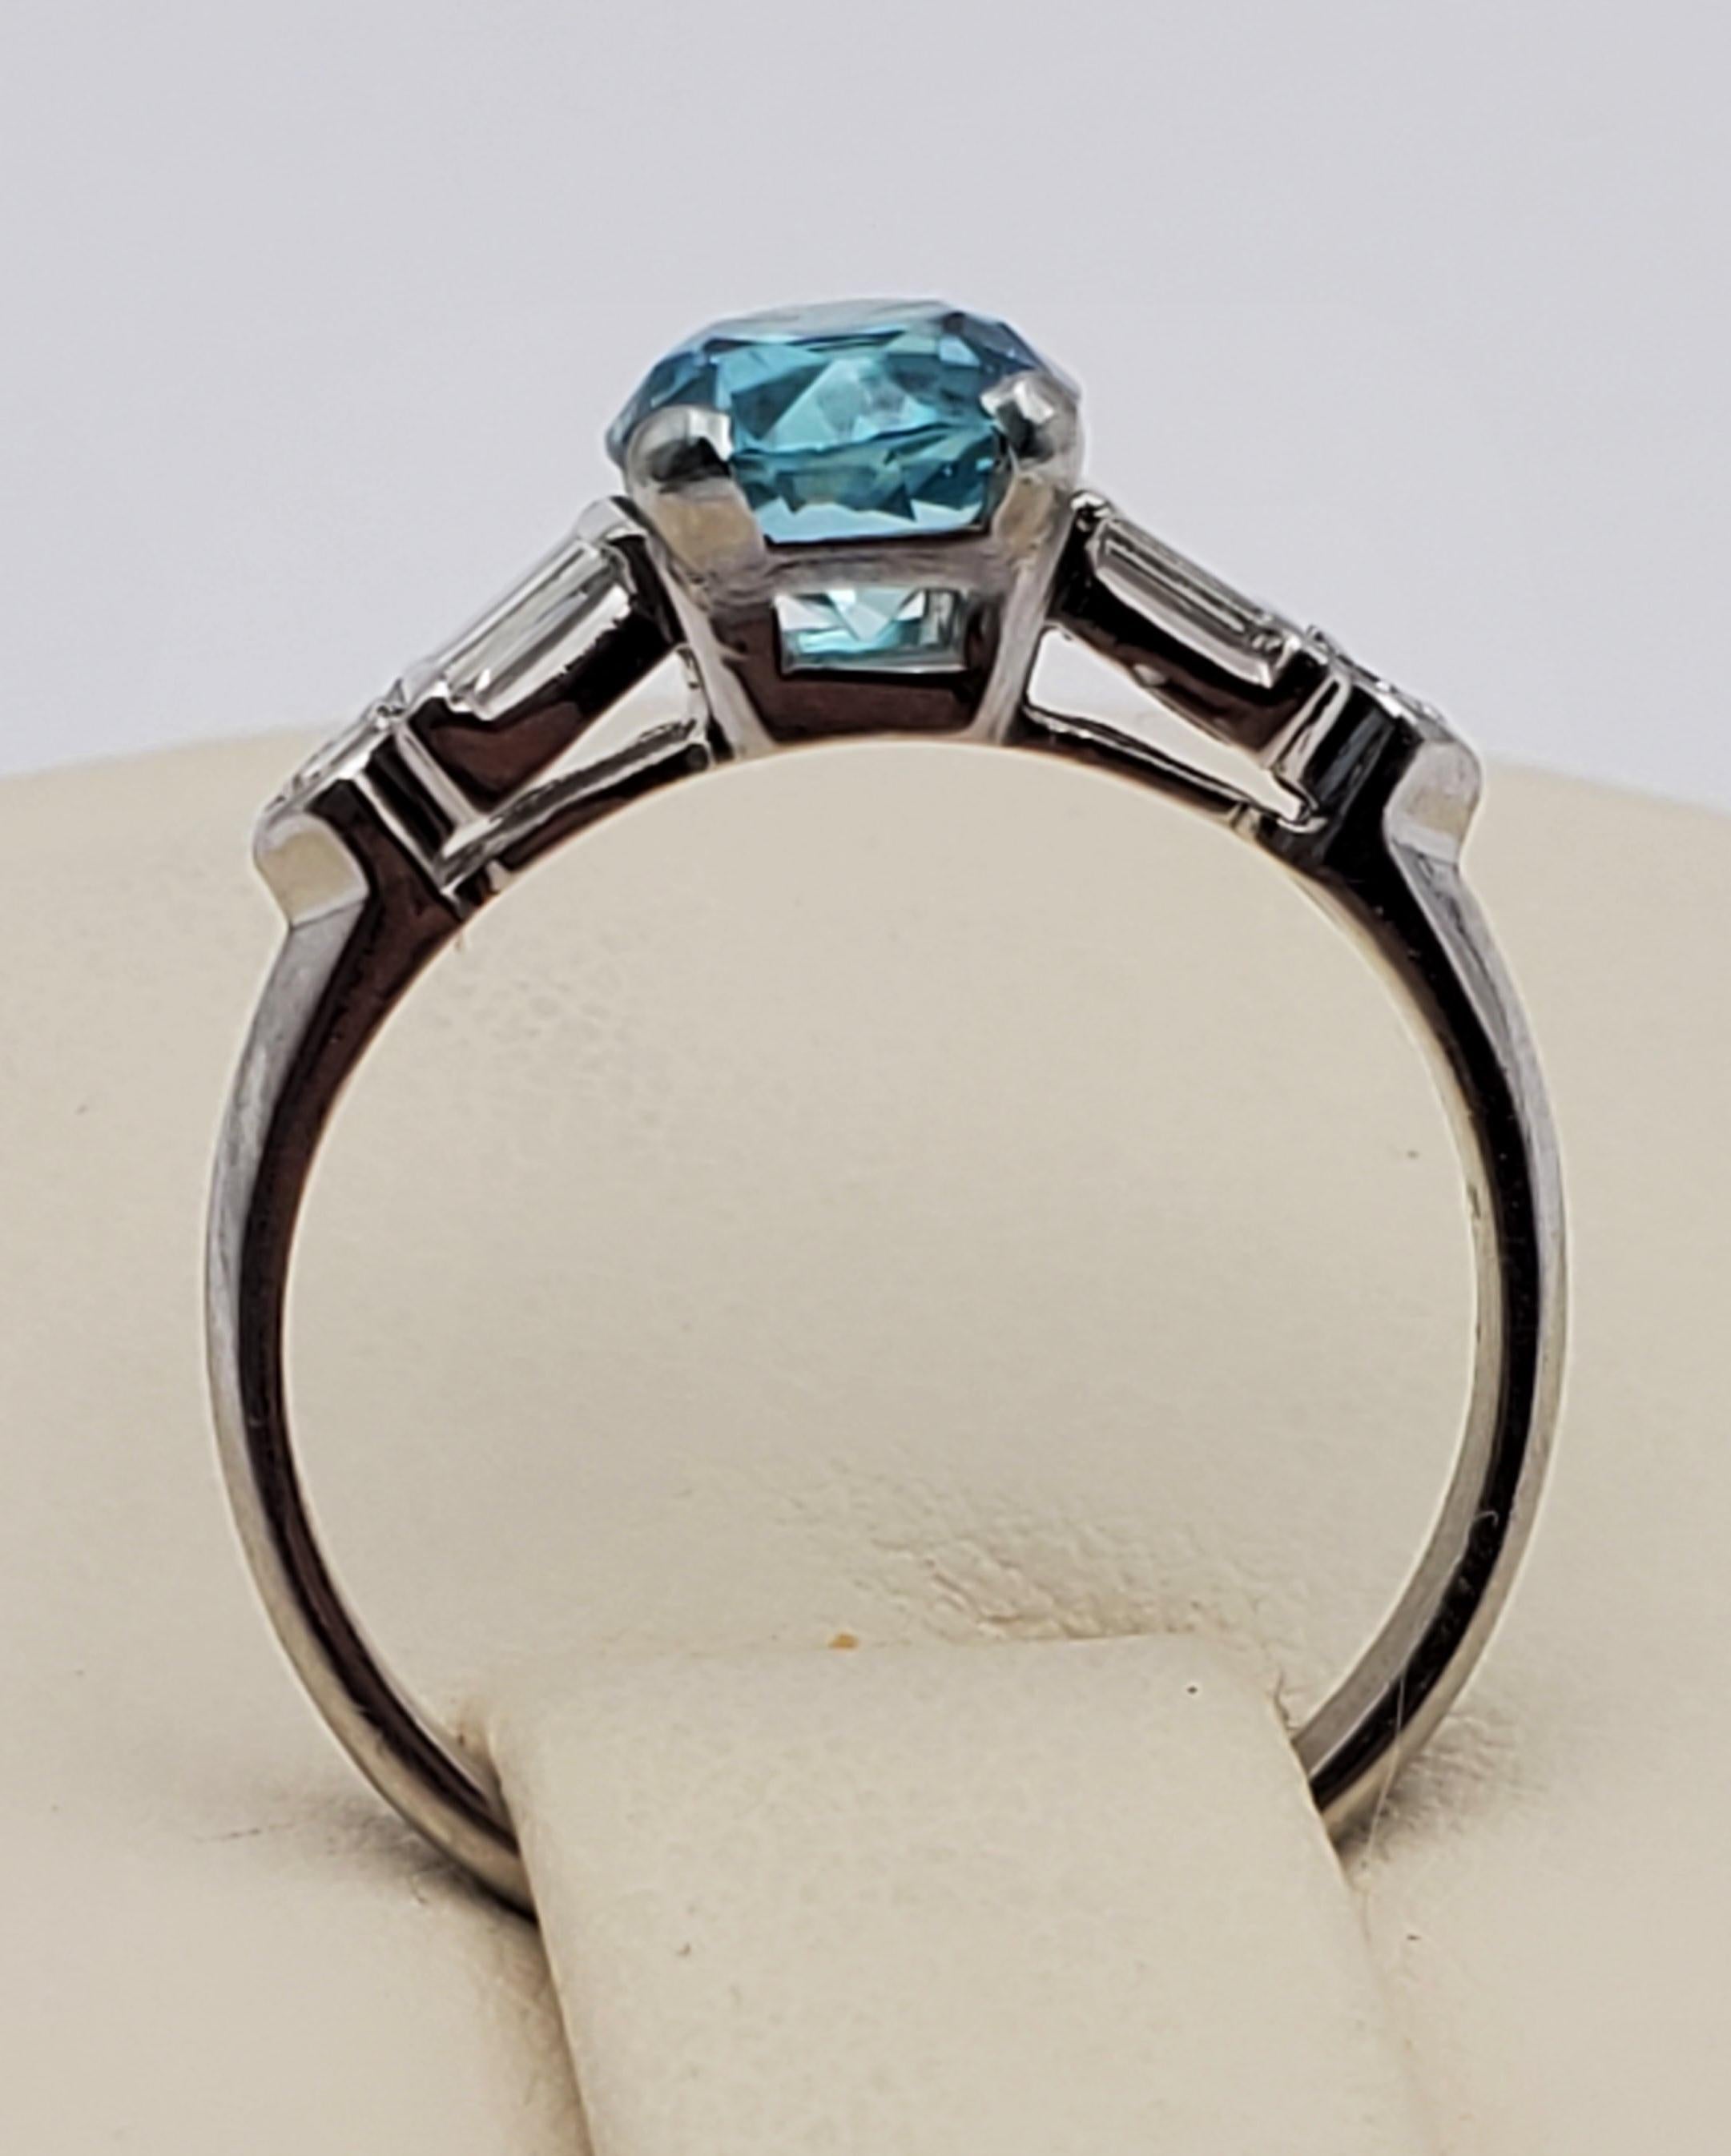 Women's Beautiful 1.61ct Blue Zircon and Diamond Vintage Ring For Sale